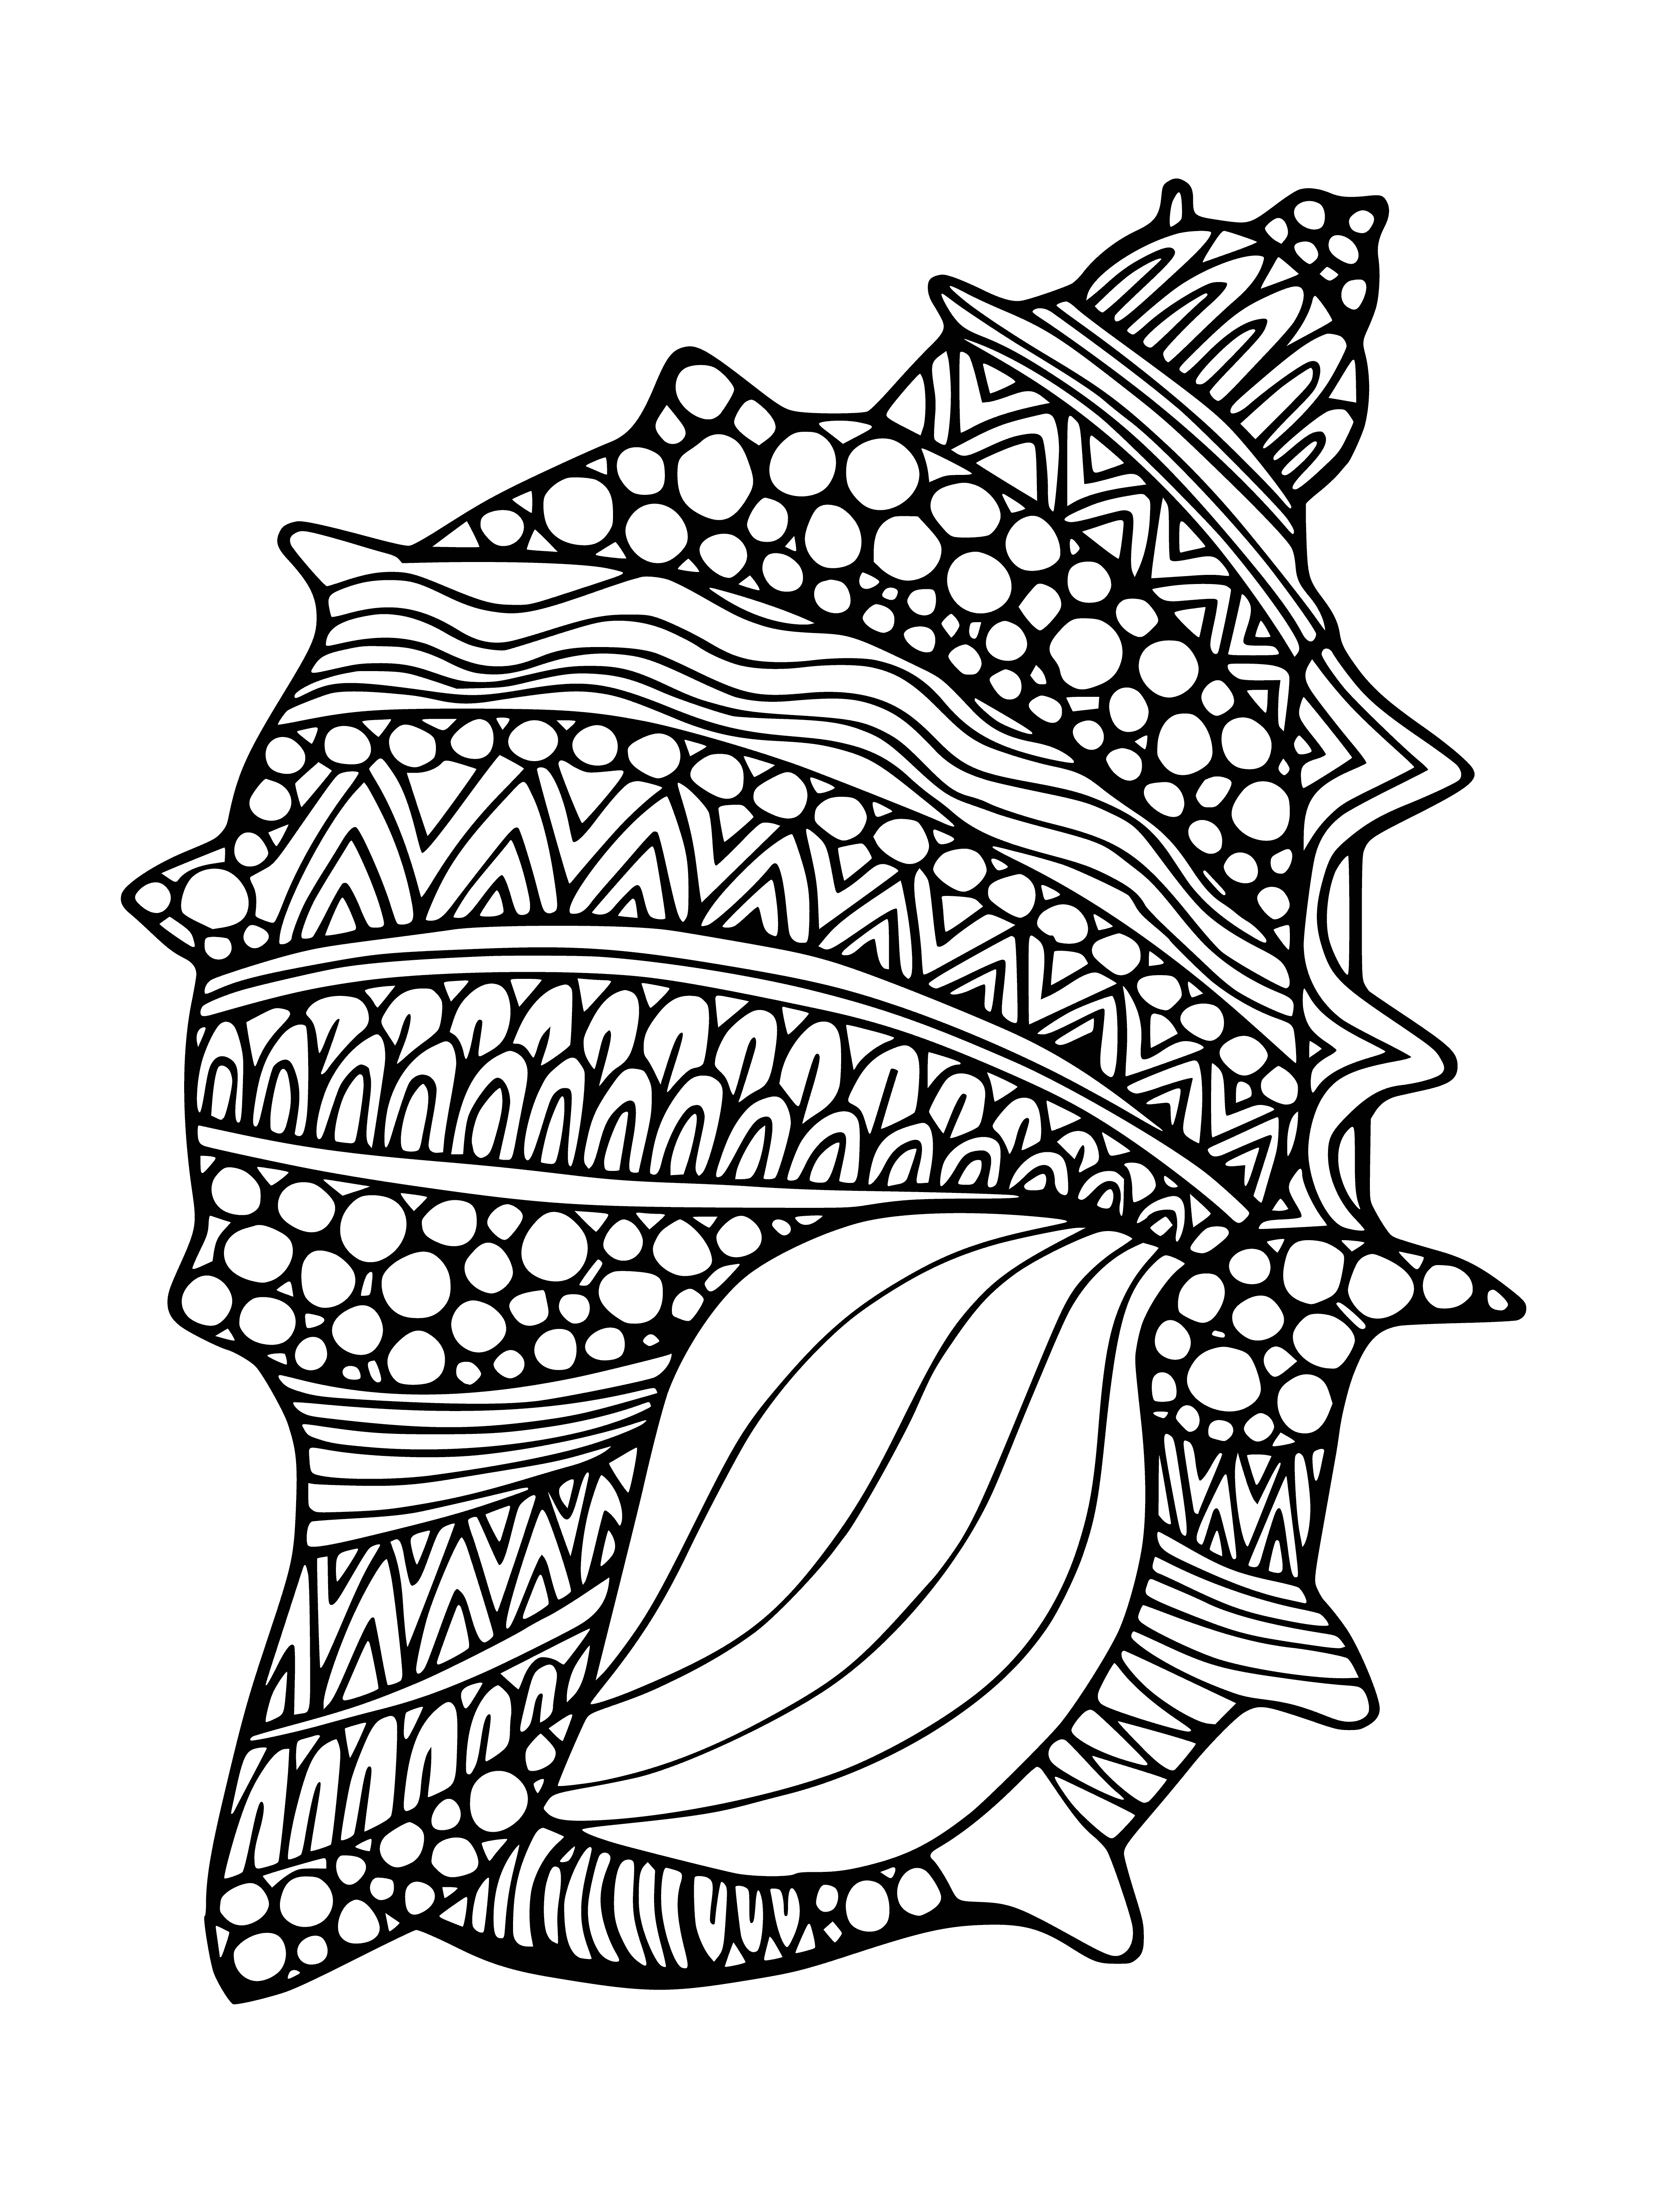 Sink coloring page